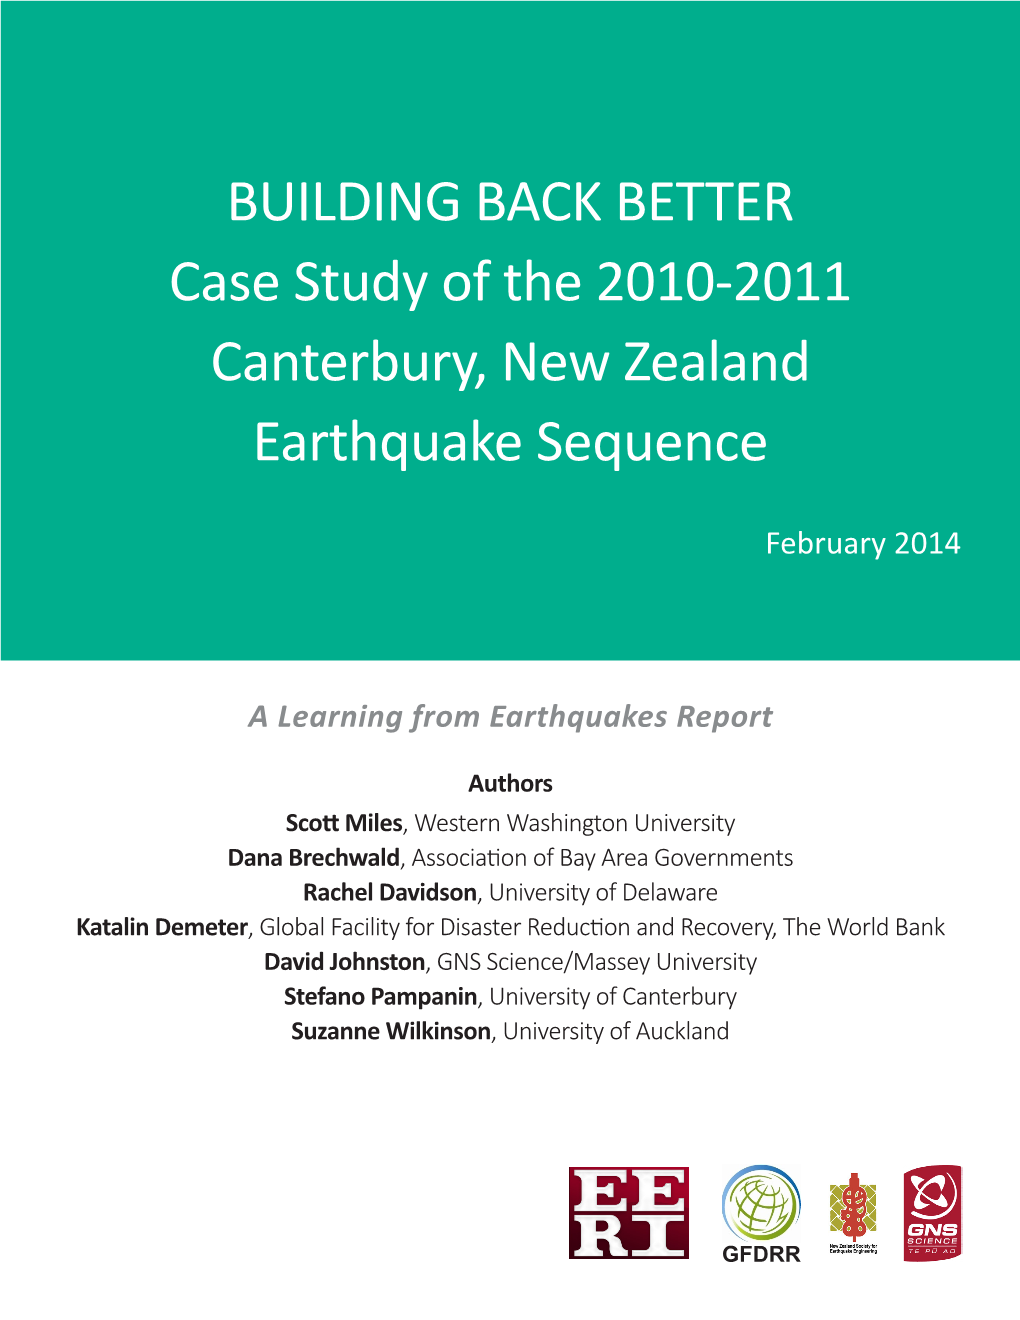 BUILDING BACK BETTER Case Study of the 2010-2011 Canterbury, New Zealand Earthquake Sequence